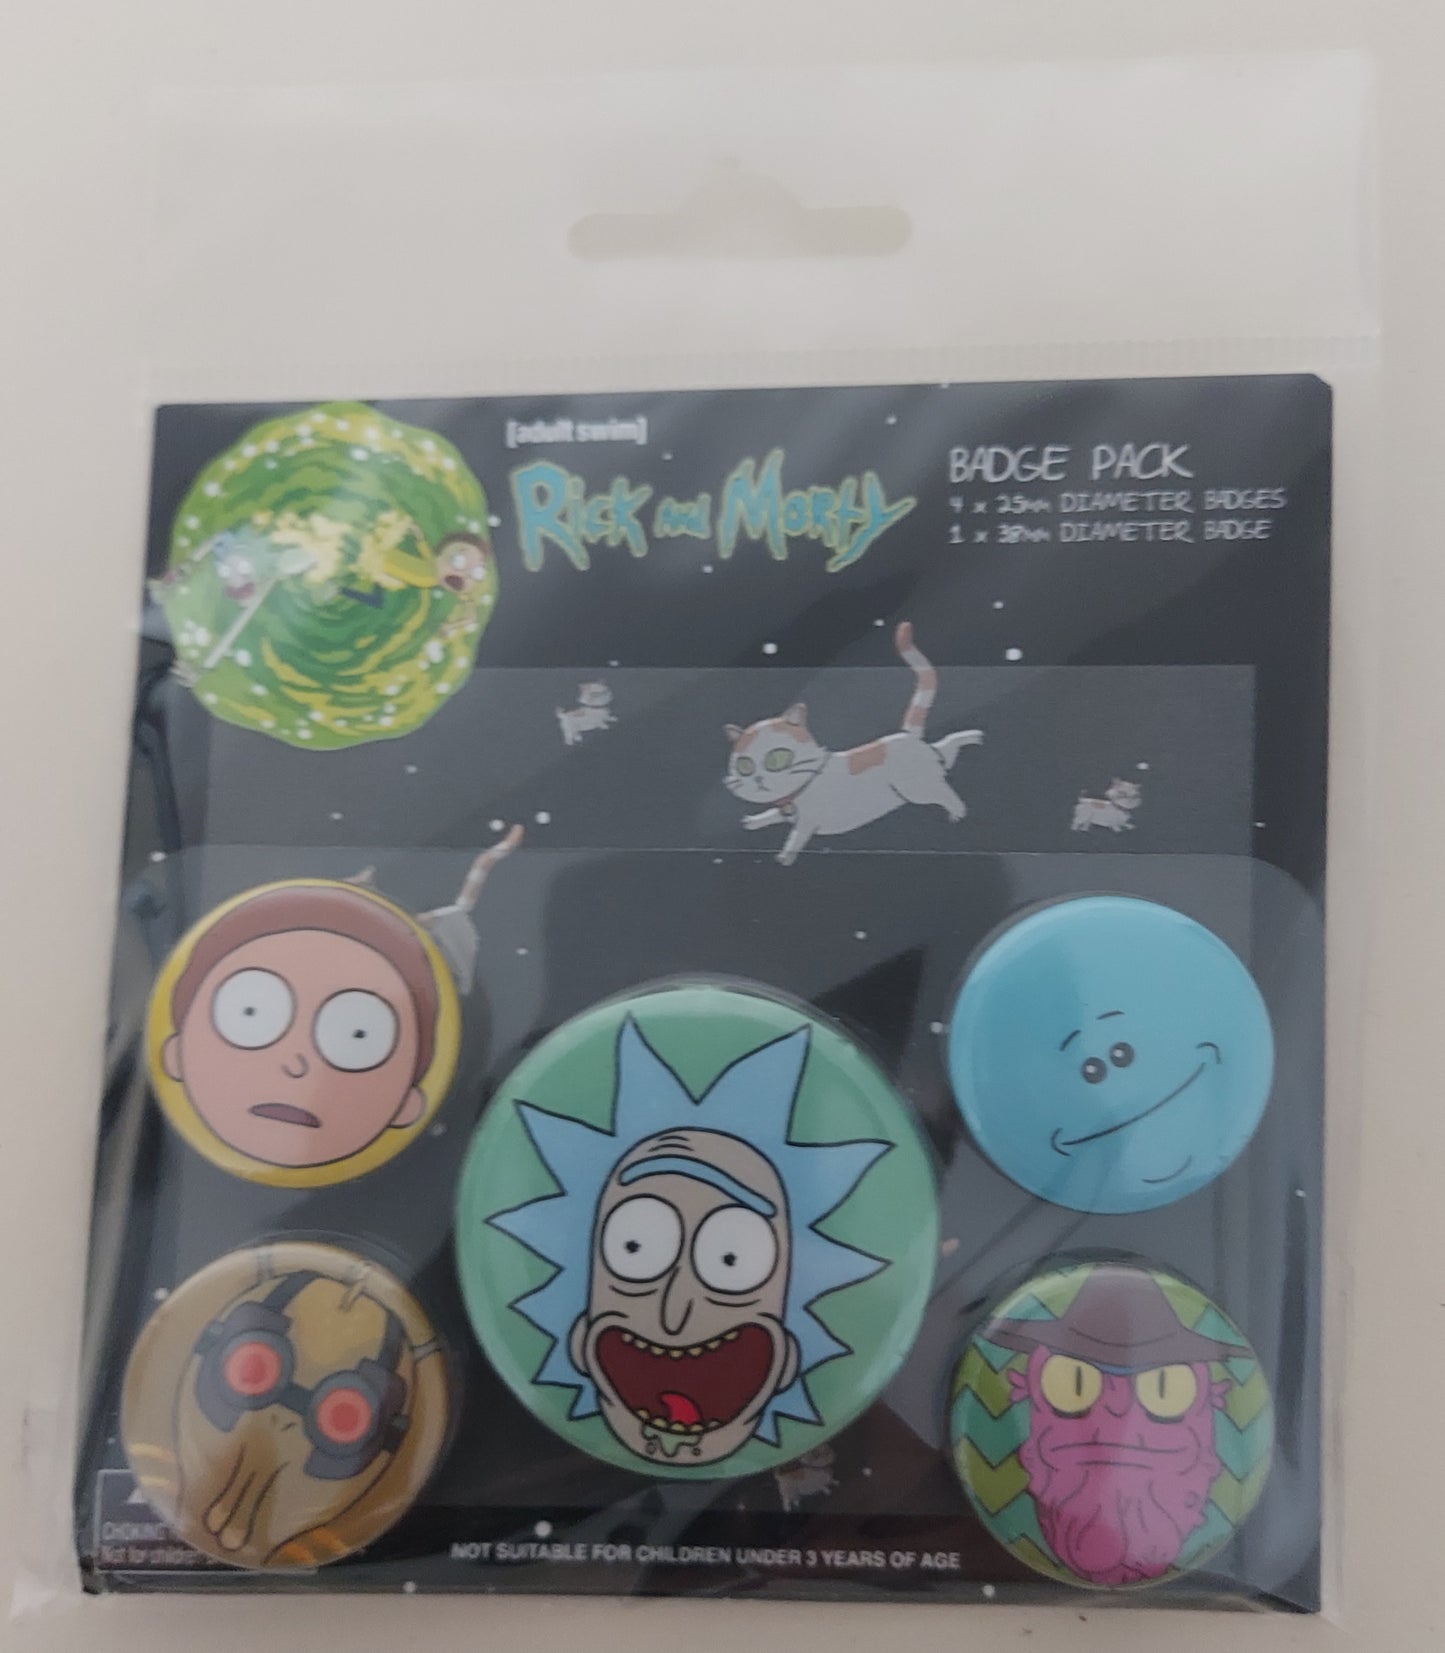 Rick and Morty  Badge pack.